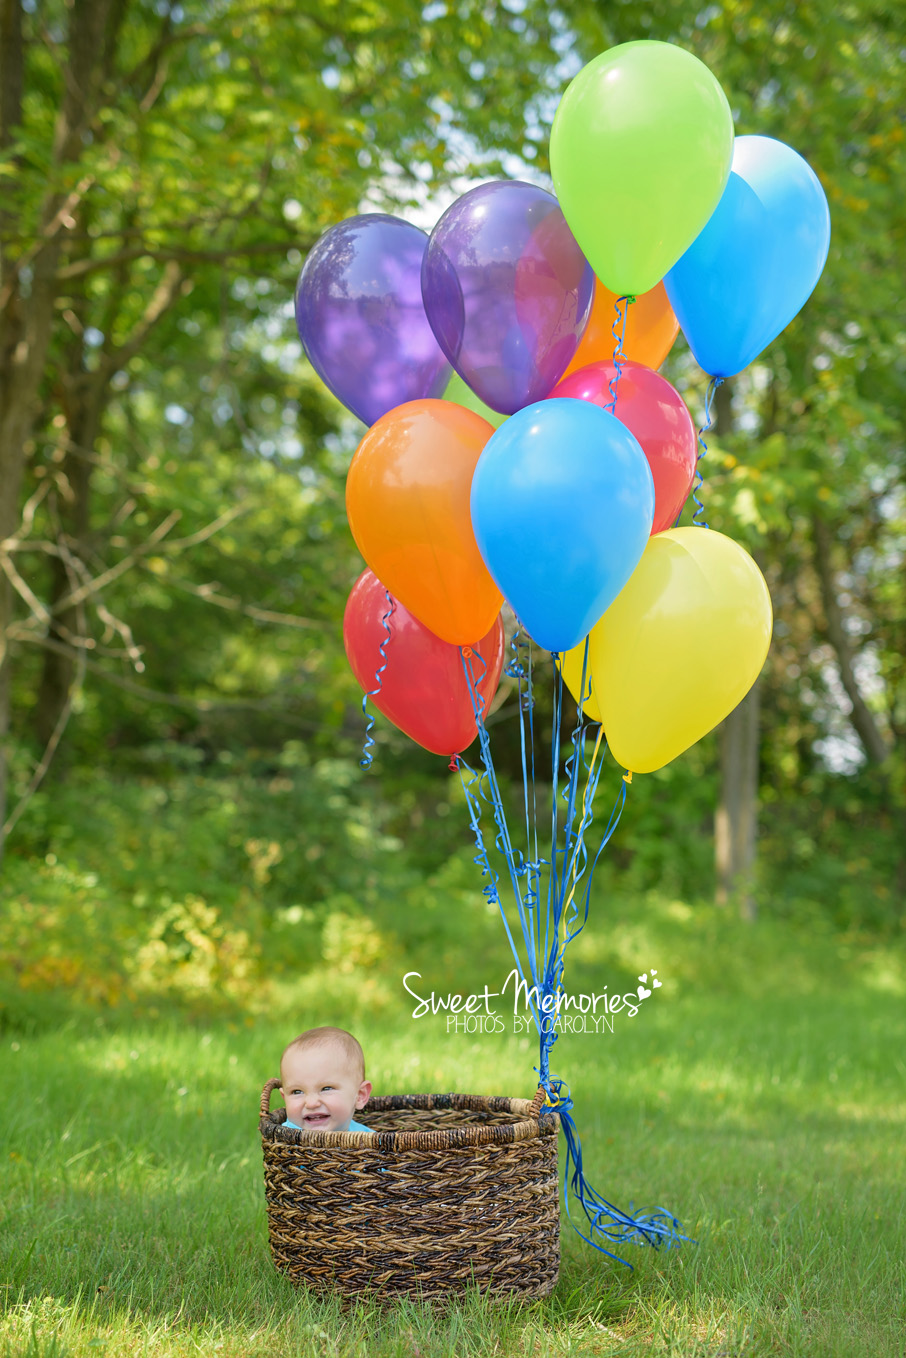 One Year Old First Birthday Cake Smash | Sweet Memories Photos by Carolyn | Newtown, PA | Bucks County Montgomery County Photographer